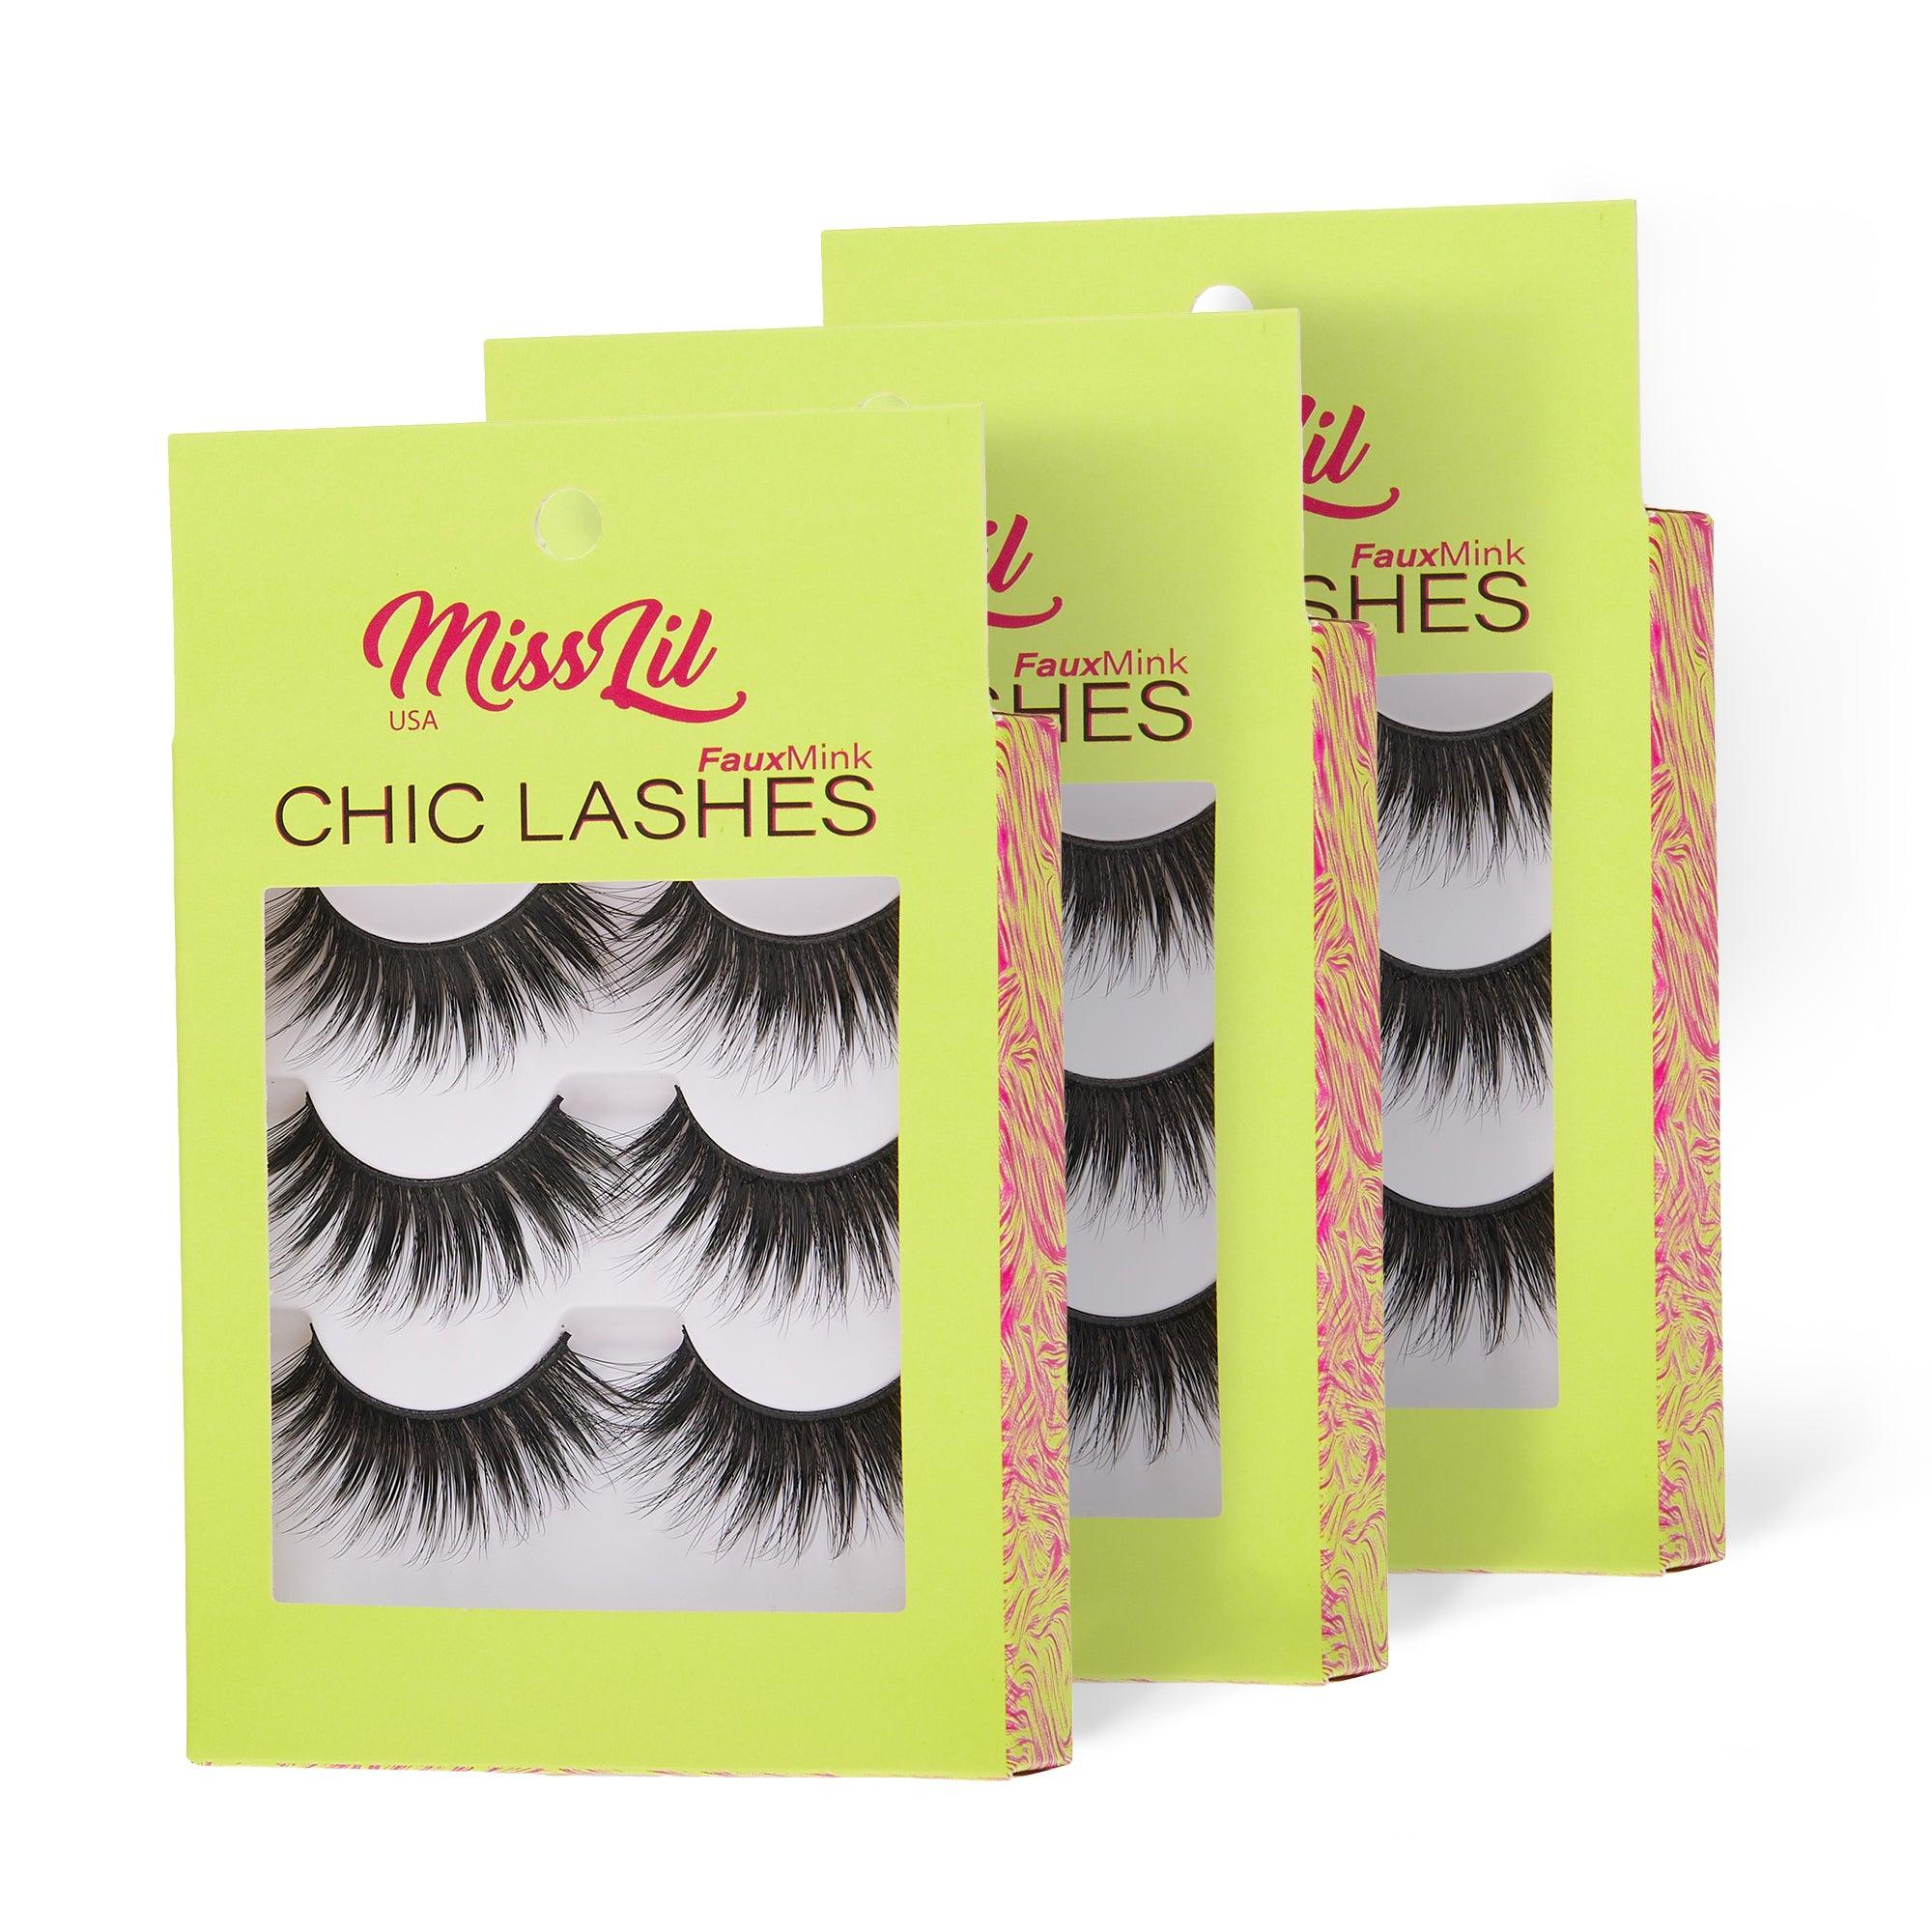 3-Pairs Lashes-Chic Lashes Collection #18 (Pack of 12) - Miss Lil USA Wholesale